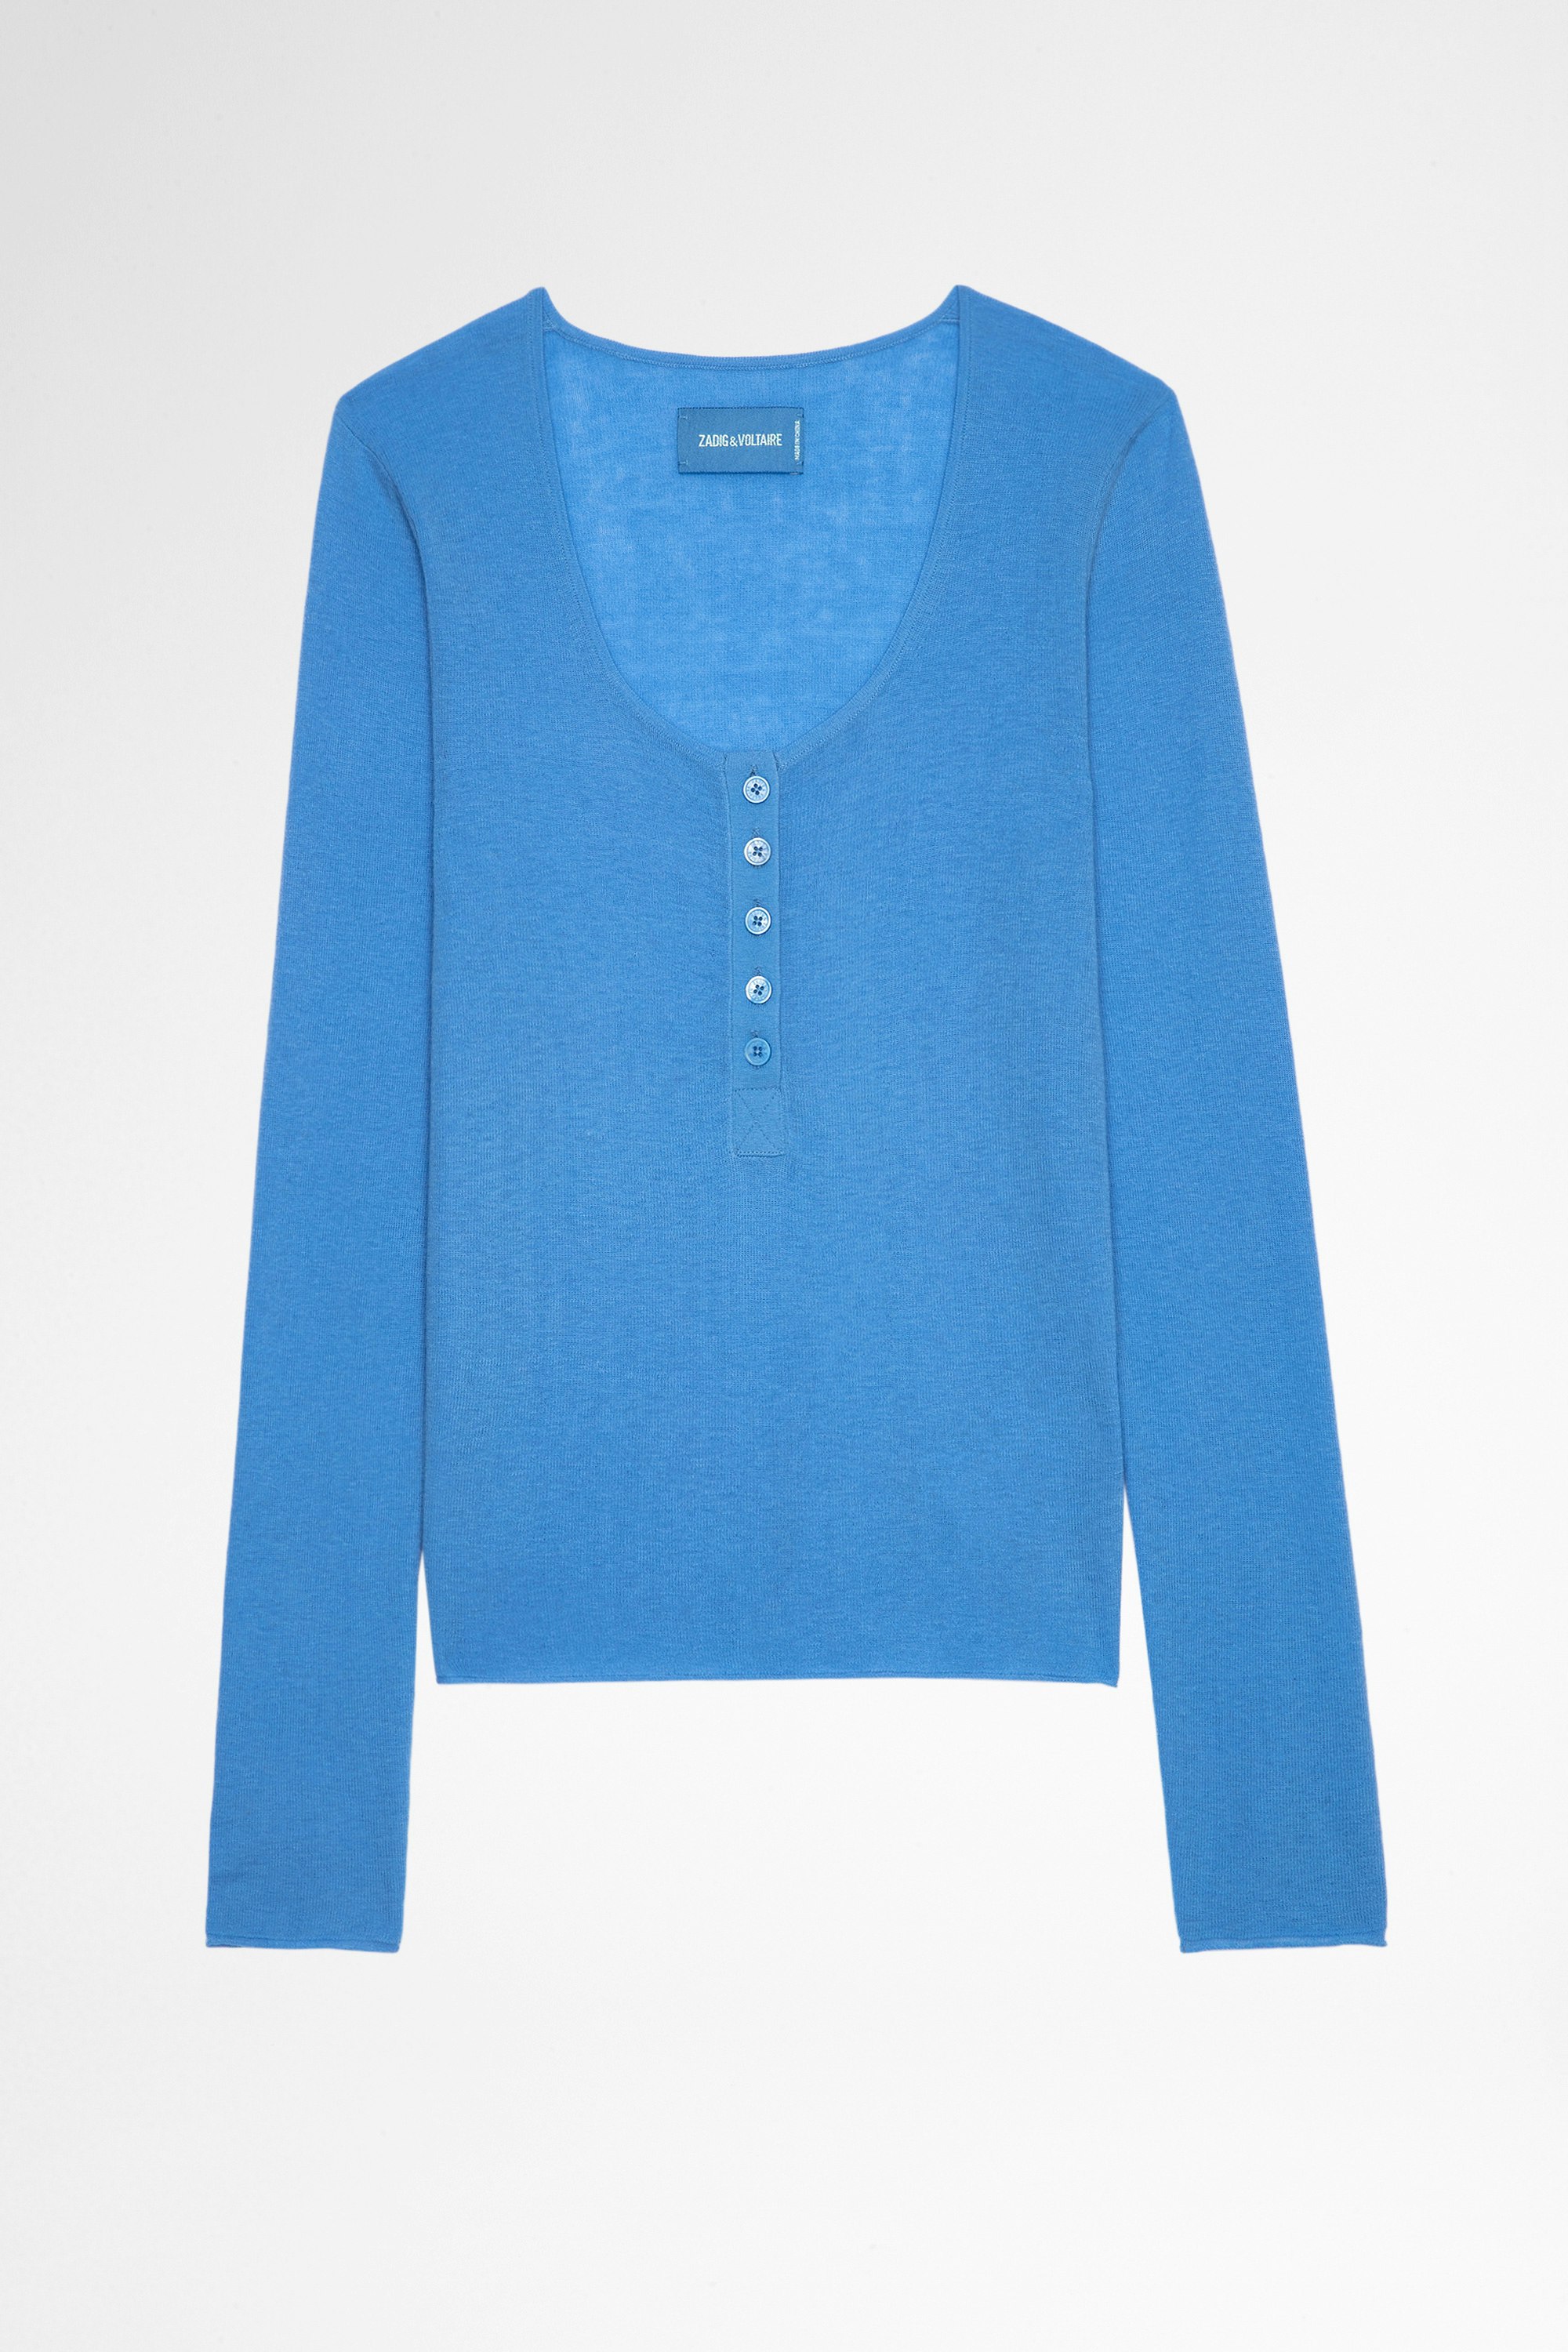 Mila ニット Women's fine knit jumper with button-down collar and long sleeves in blue